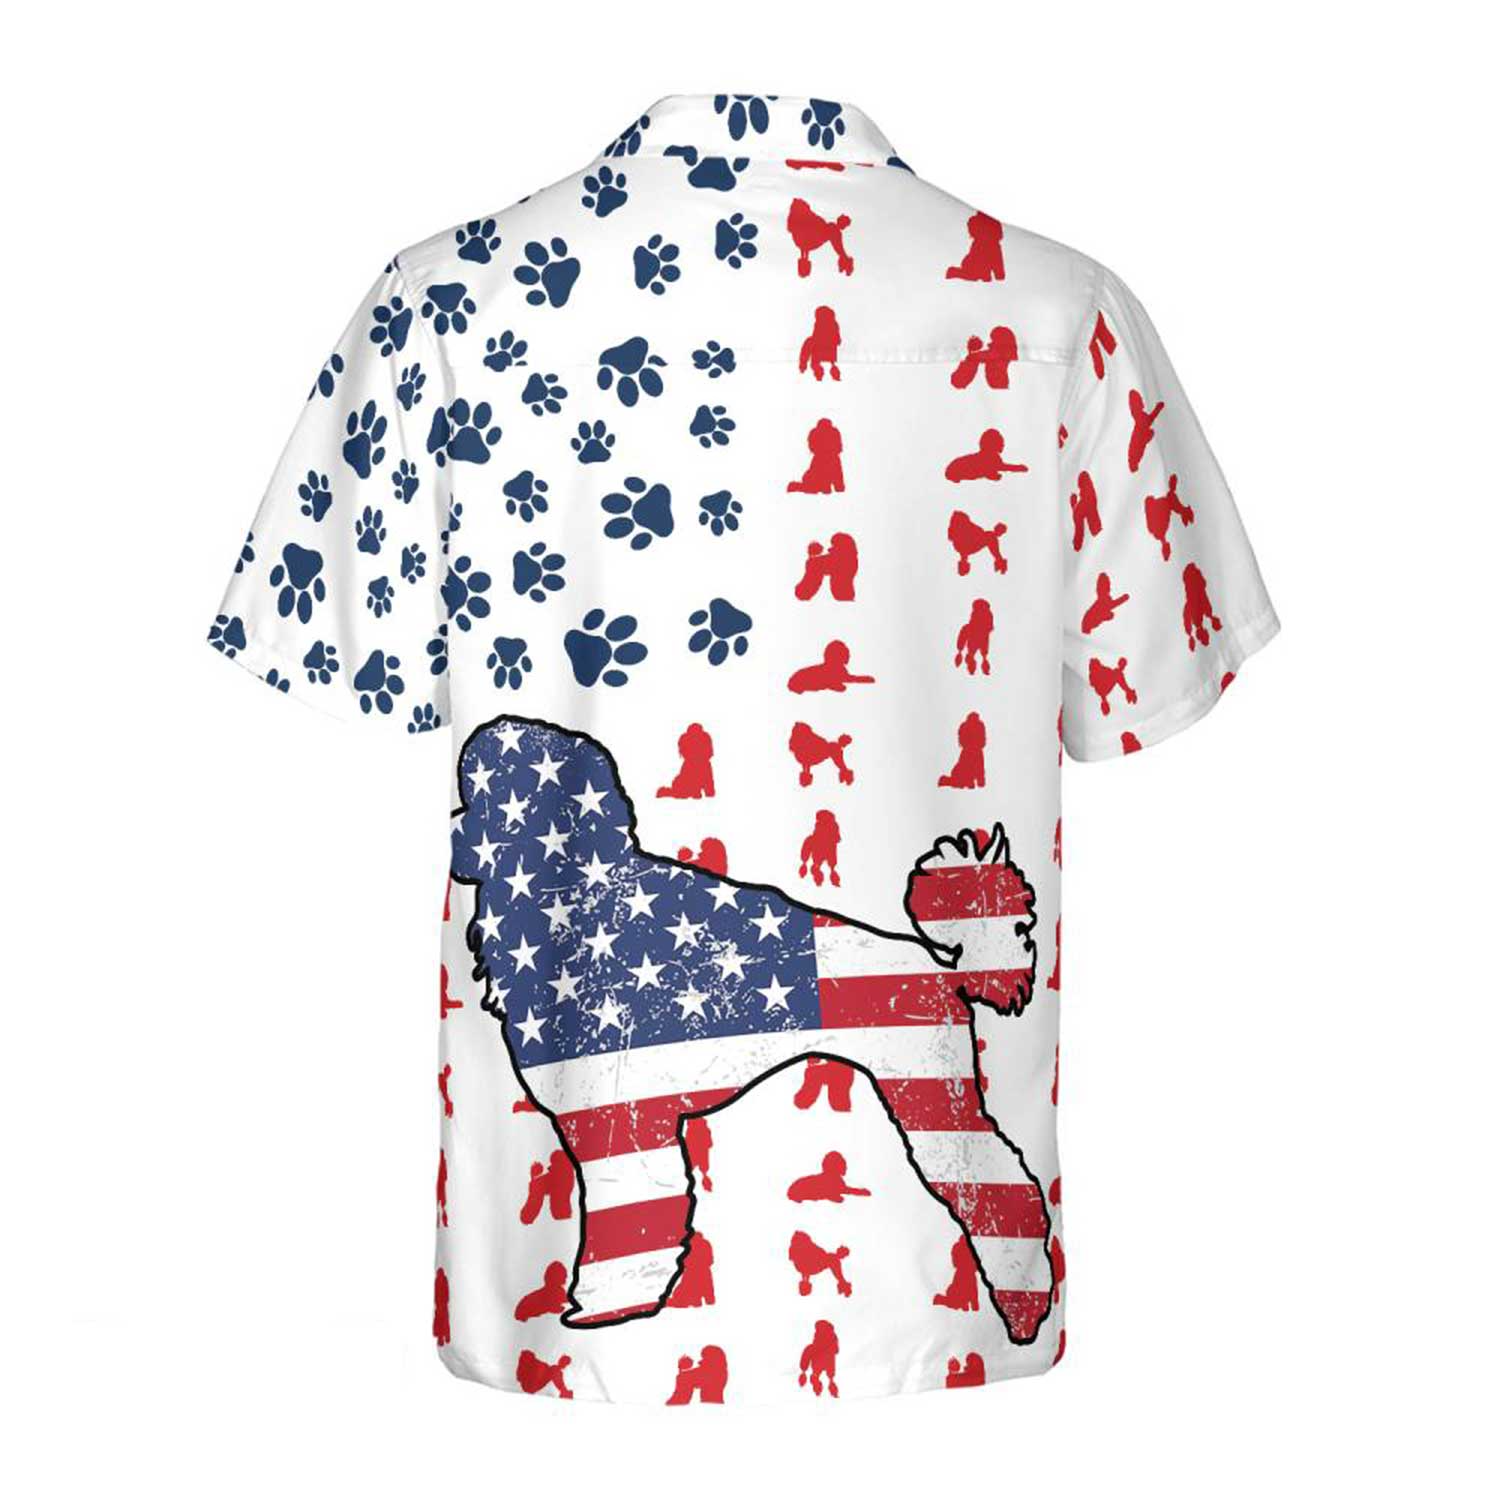 Poodle Aloha Hawaiian Shirts For Summer/ Poodles American Flag Hawaiian Shirt For Men Women/ Gift For Dog Lovers/ 4th Of July Party/ Independence Day